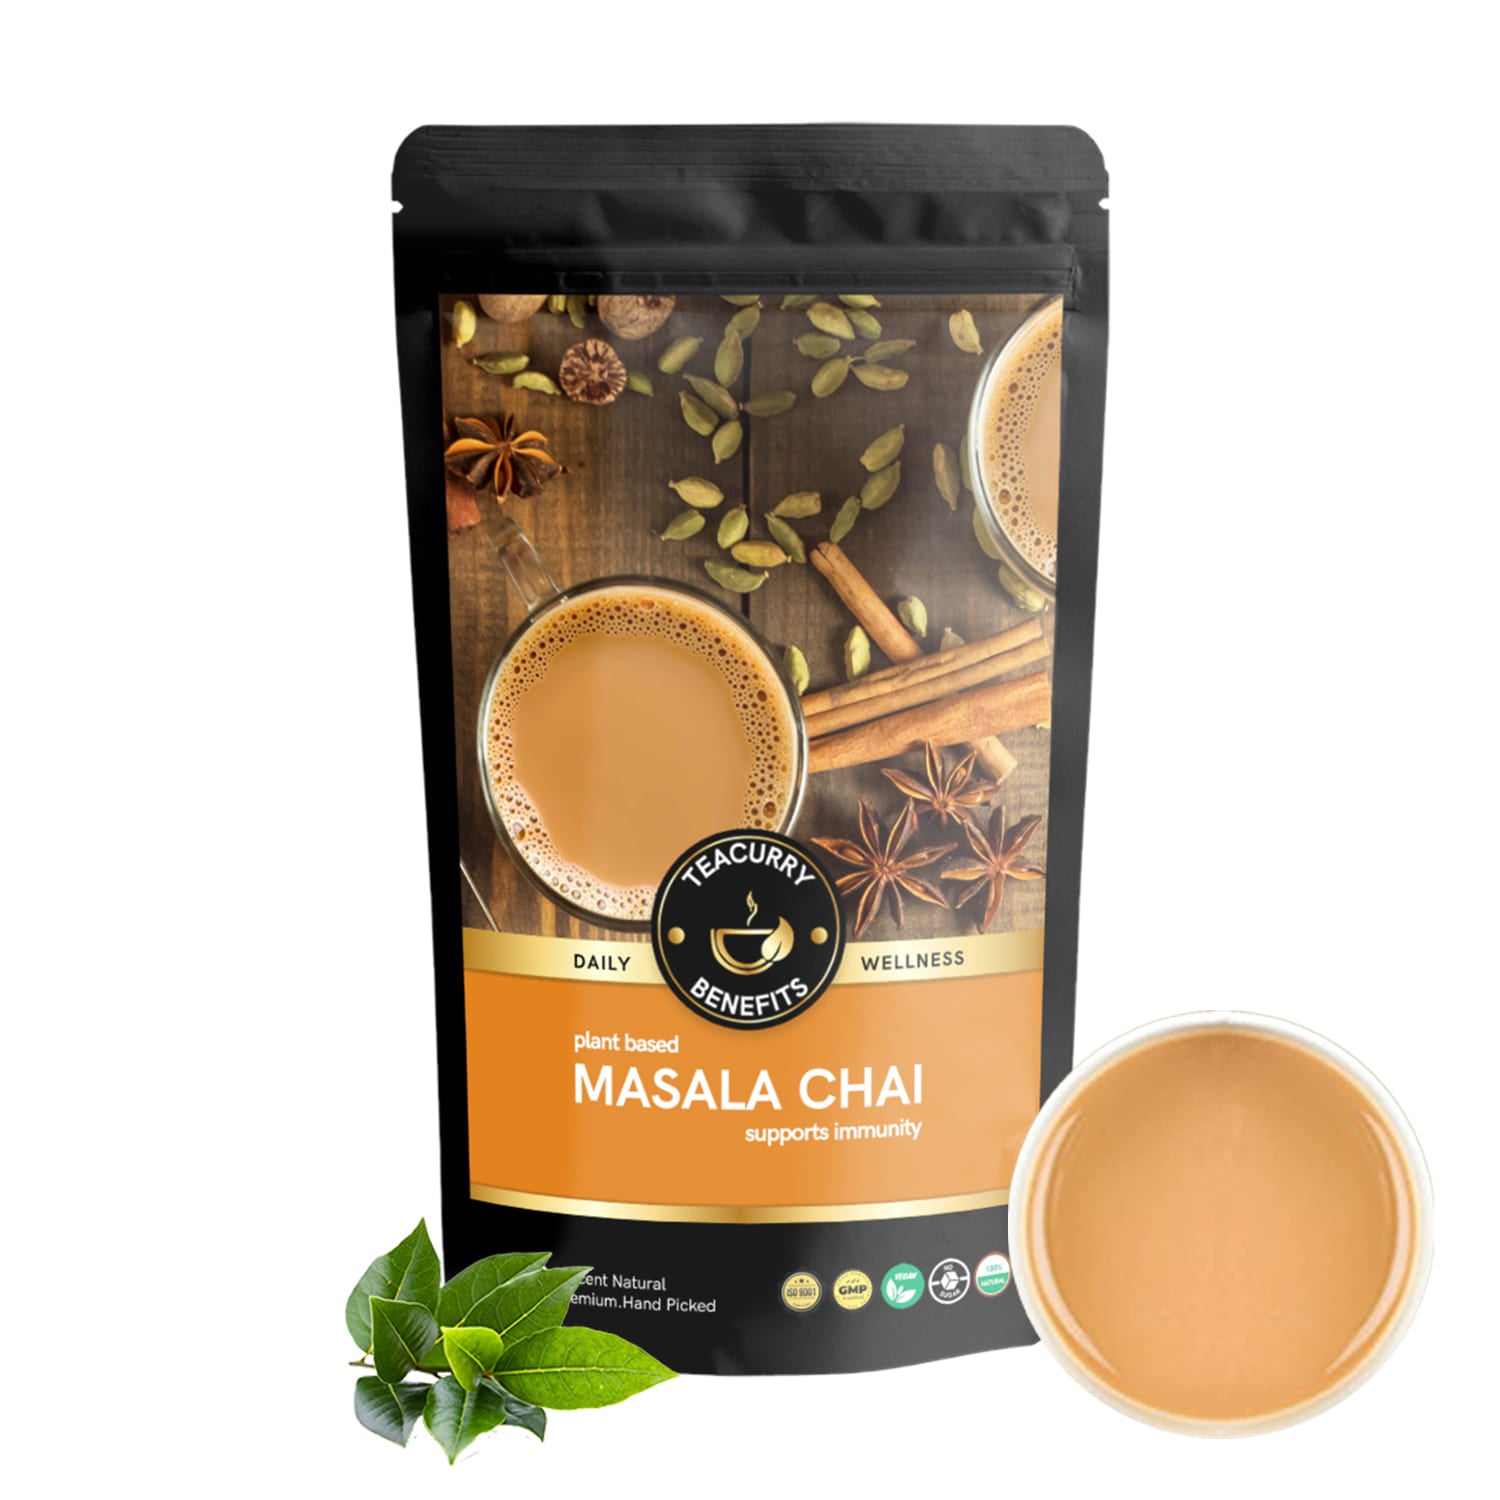 Teacurry Masala Chai Tea - Resistance, Common Cold, Aches In The Body